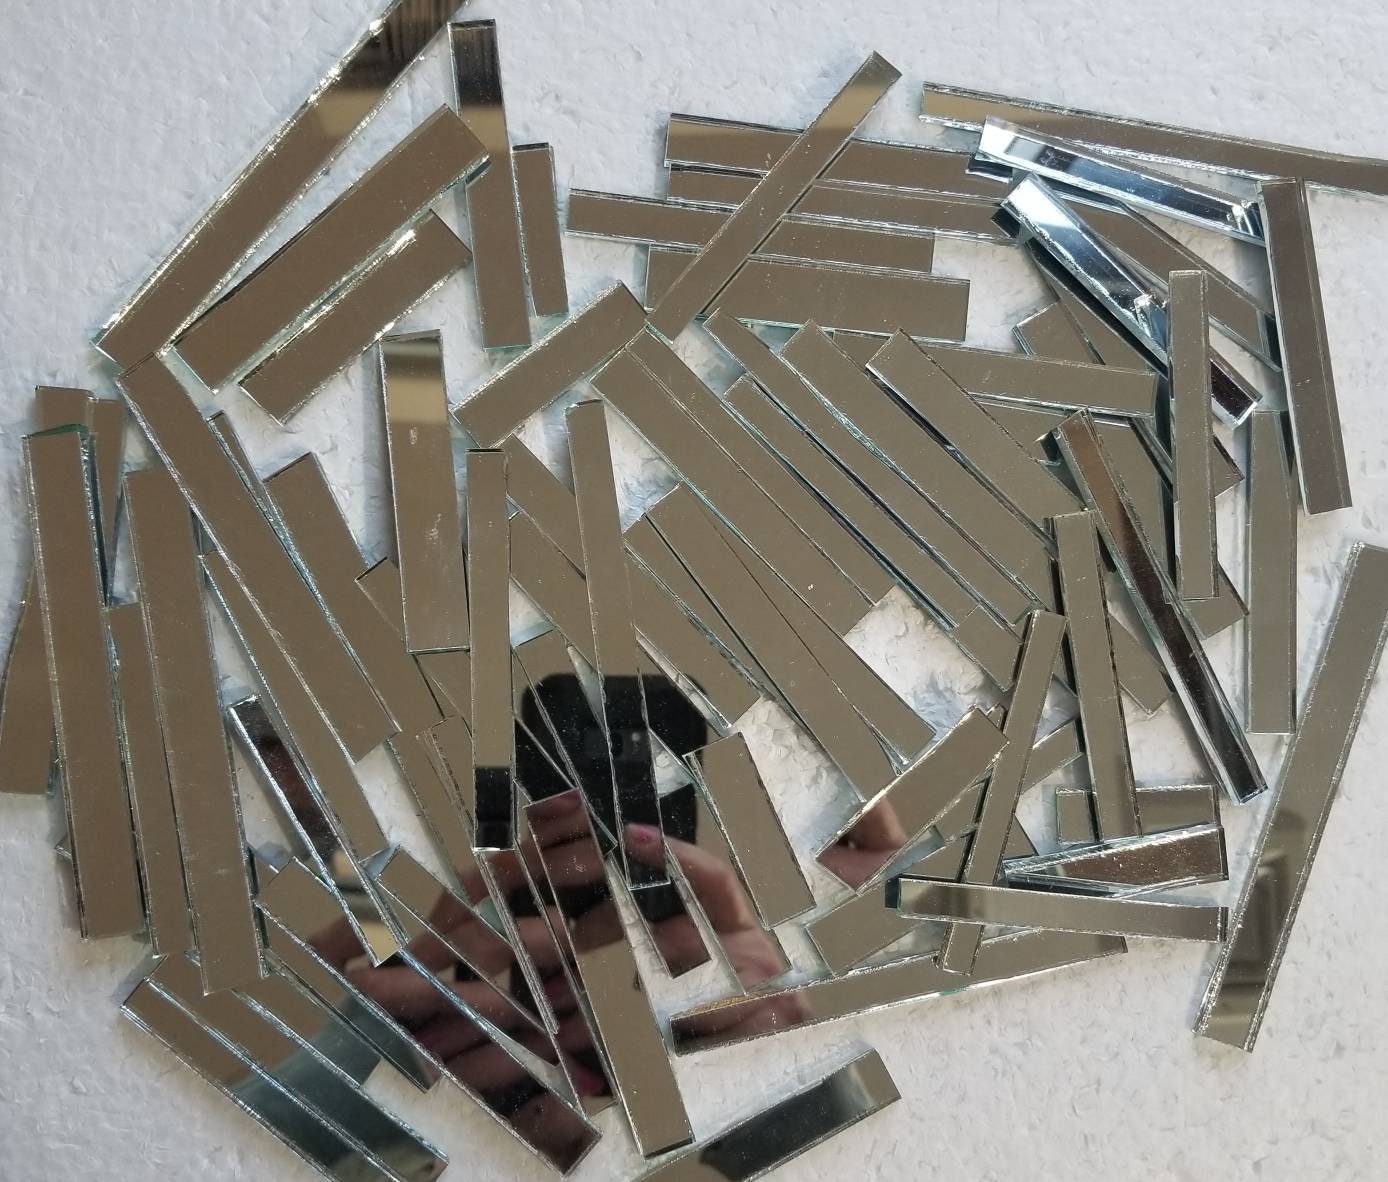 MIRROR Strips of Glass (B14-mir) 1-1/2 Pounds for Stained Glass / Mosaics /  Art Mirror Project